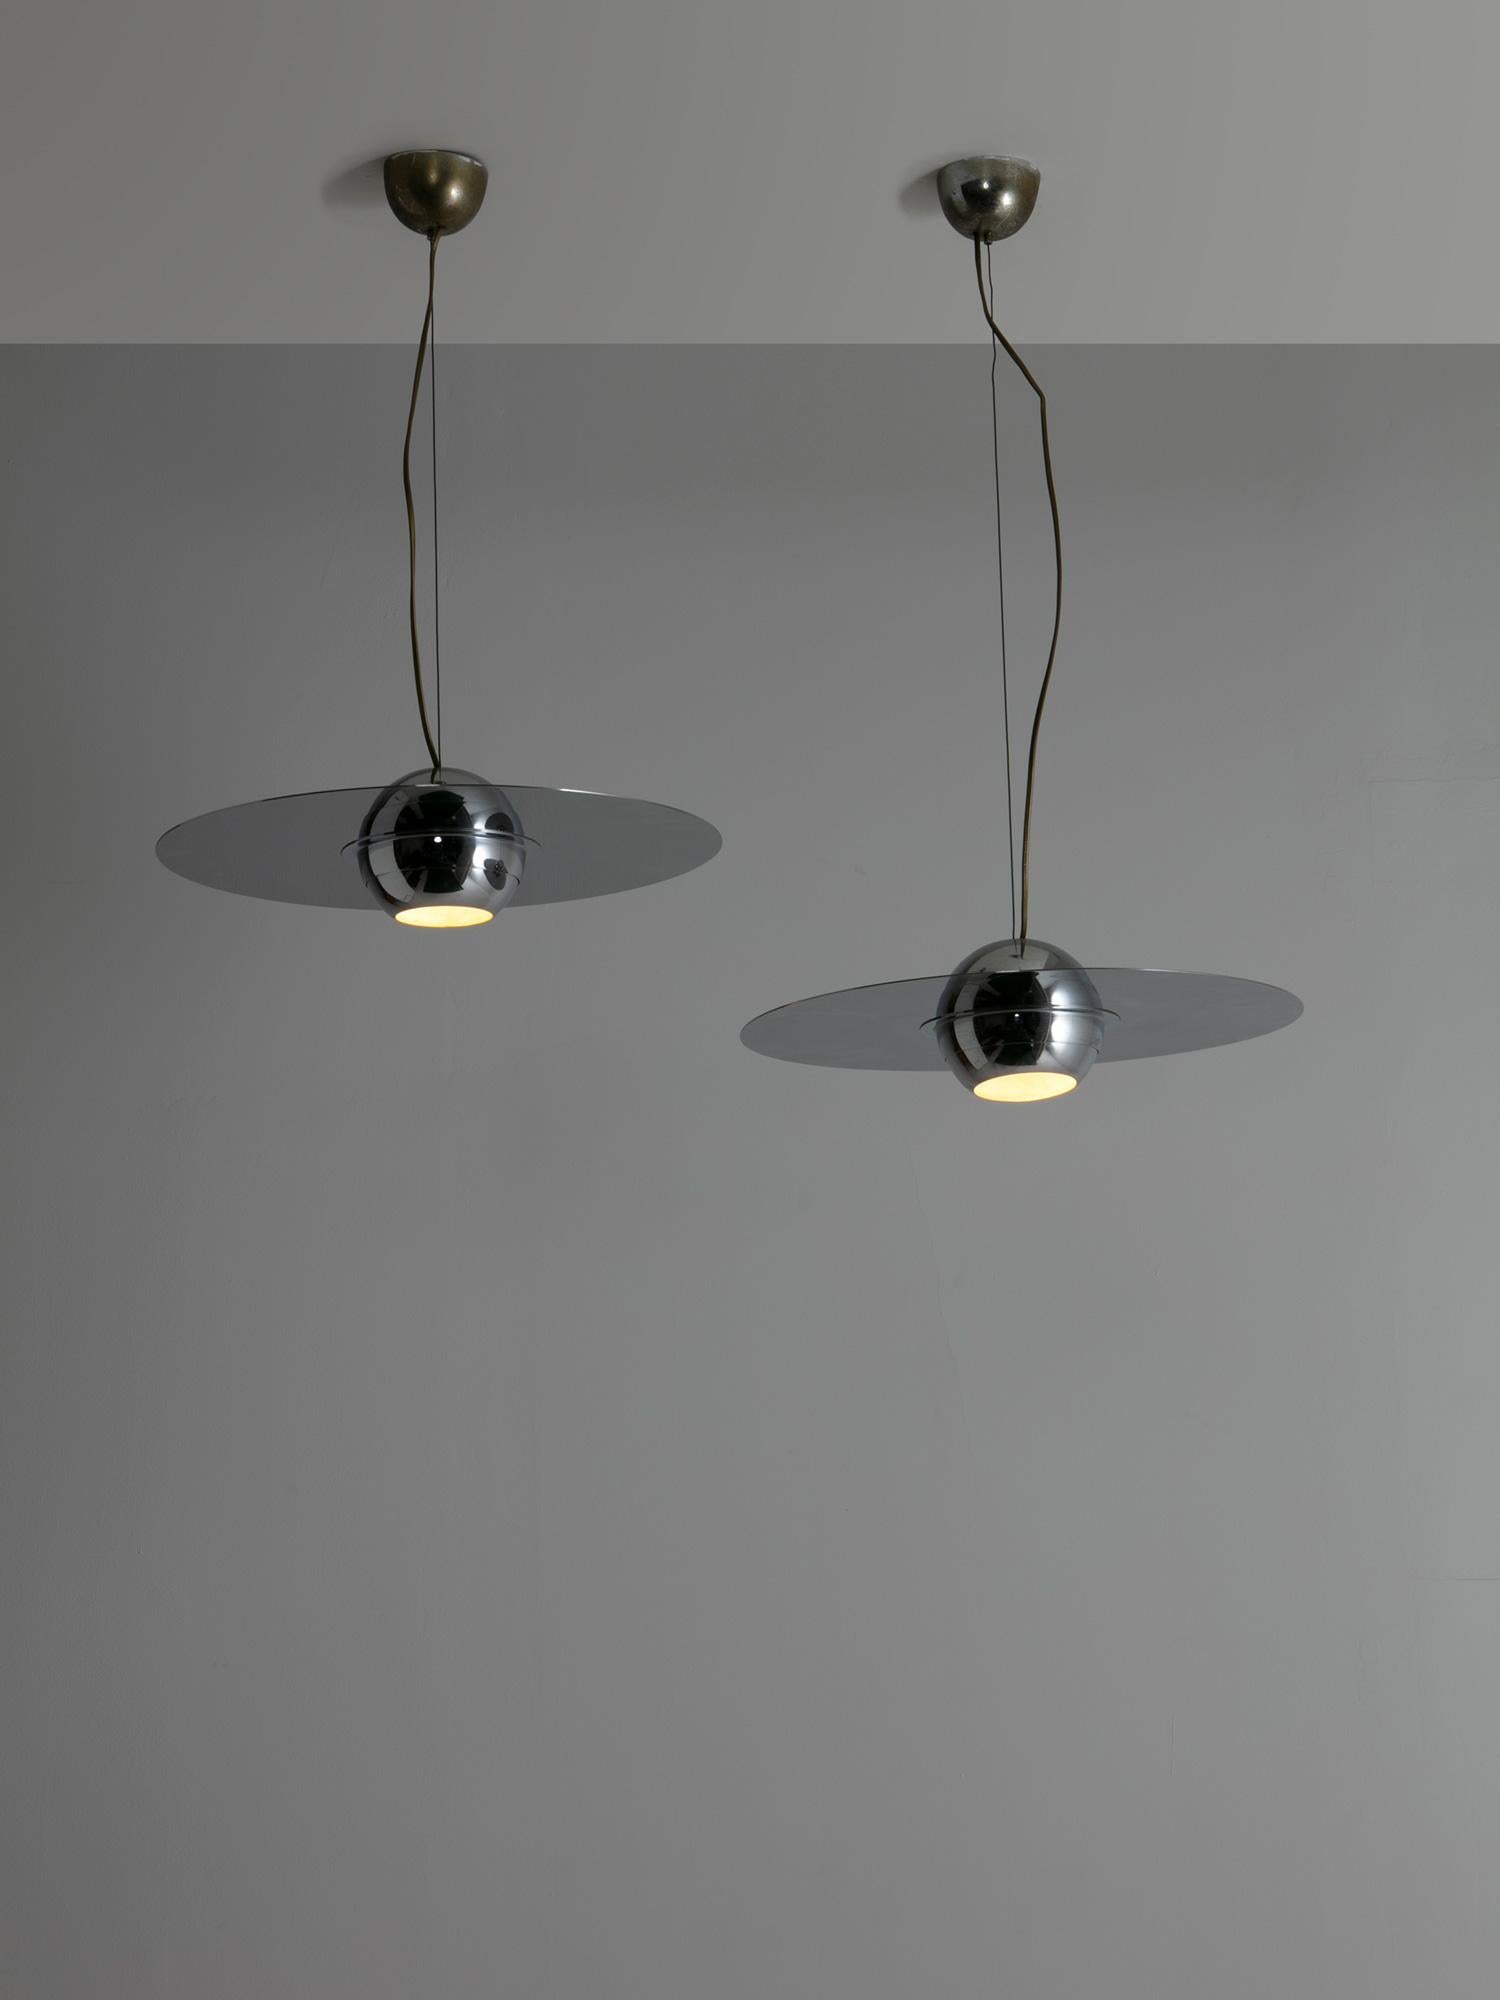 Rare set of two Padacroma pendants by Sergio Mazza and Giuliana Gramigna for Quattrifolio.
Large polished stainless steel disc hosting a direction-adjustable inside cap.